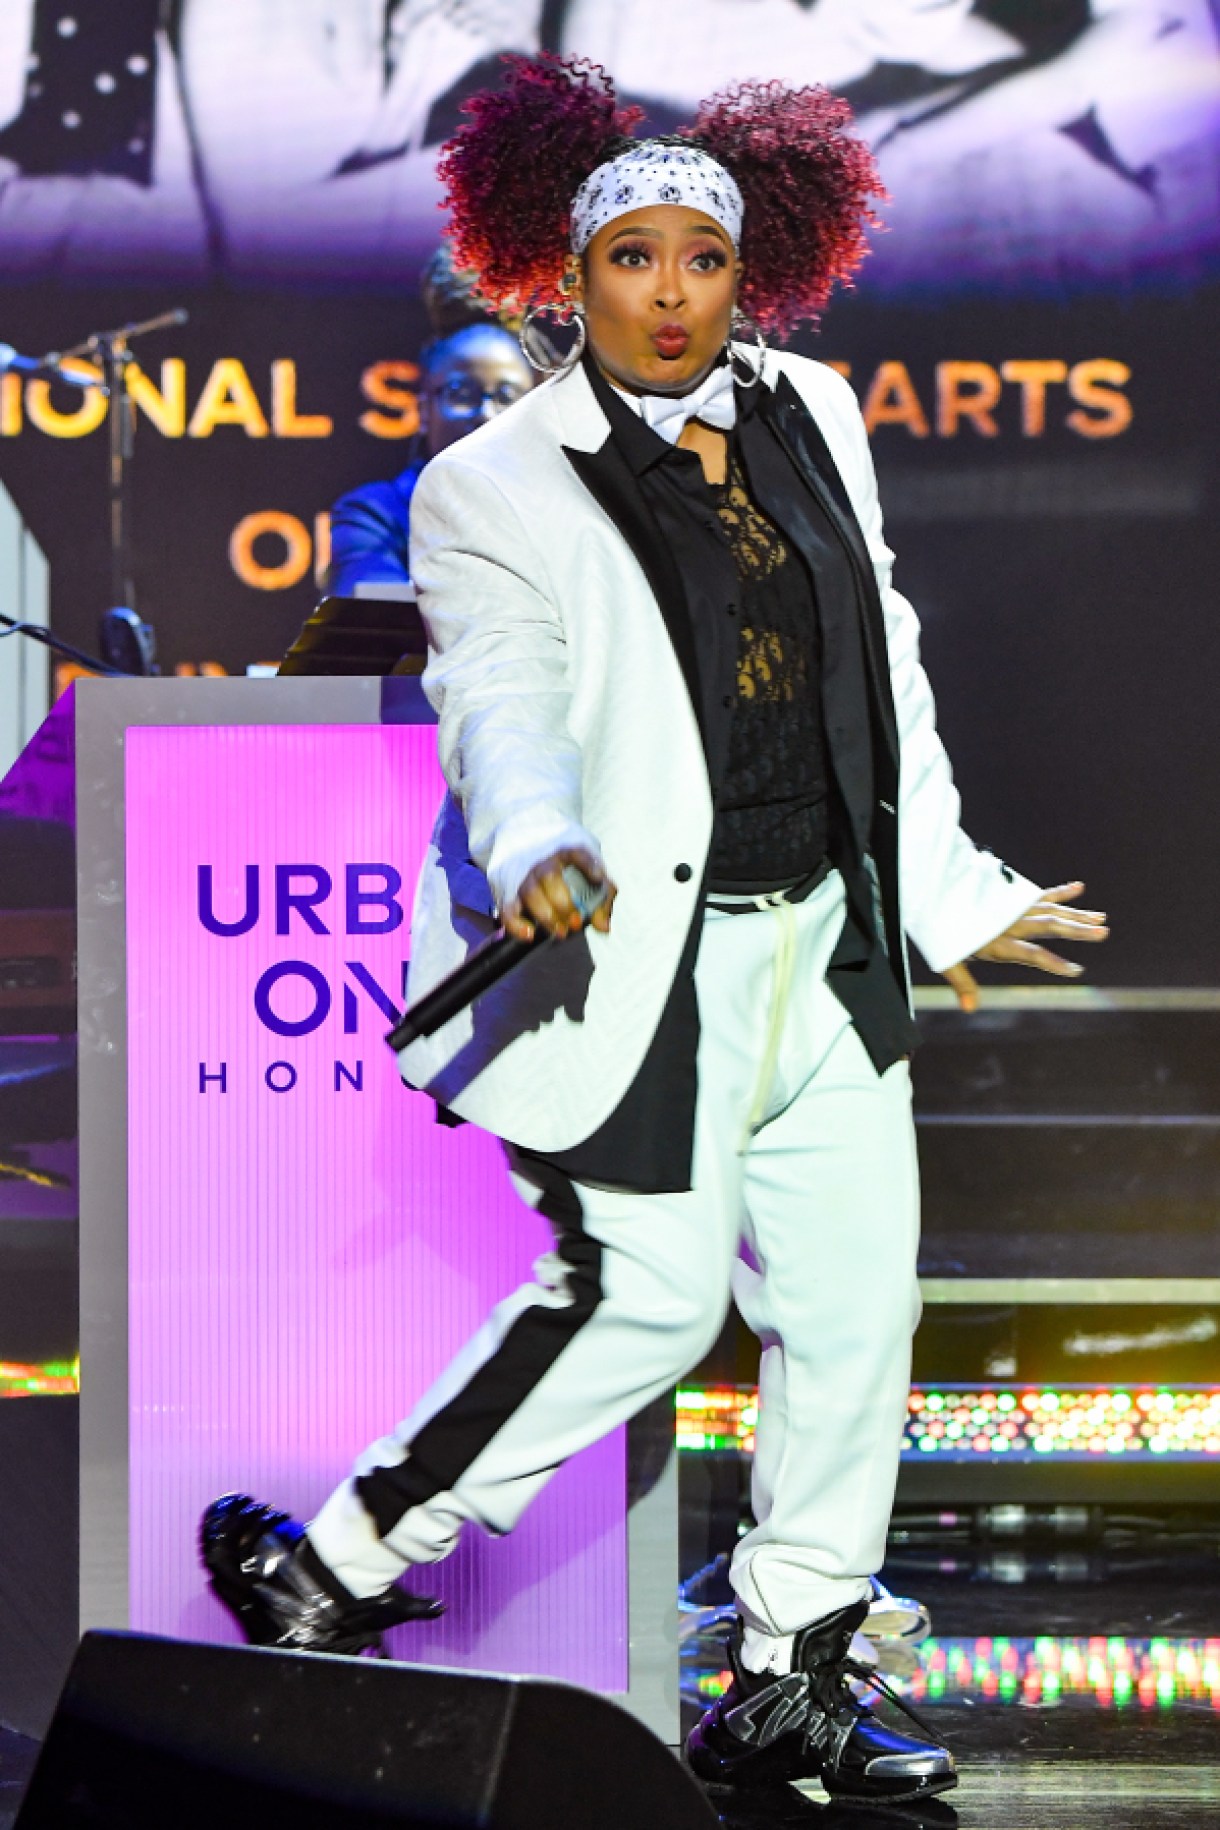 AUSTELL, GEORGIA - MARCH 17: Da Brat performs during TV One's 3rd Annual Urban One Honors at Riverside EpiCenter on March 17, 2021 in Austell, Georgia. (Photo by Paras Griffin/Getty Images for TV One)